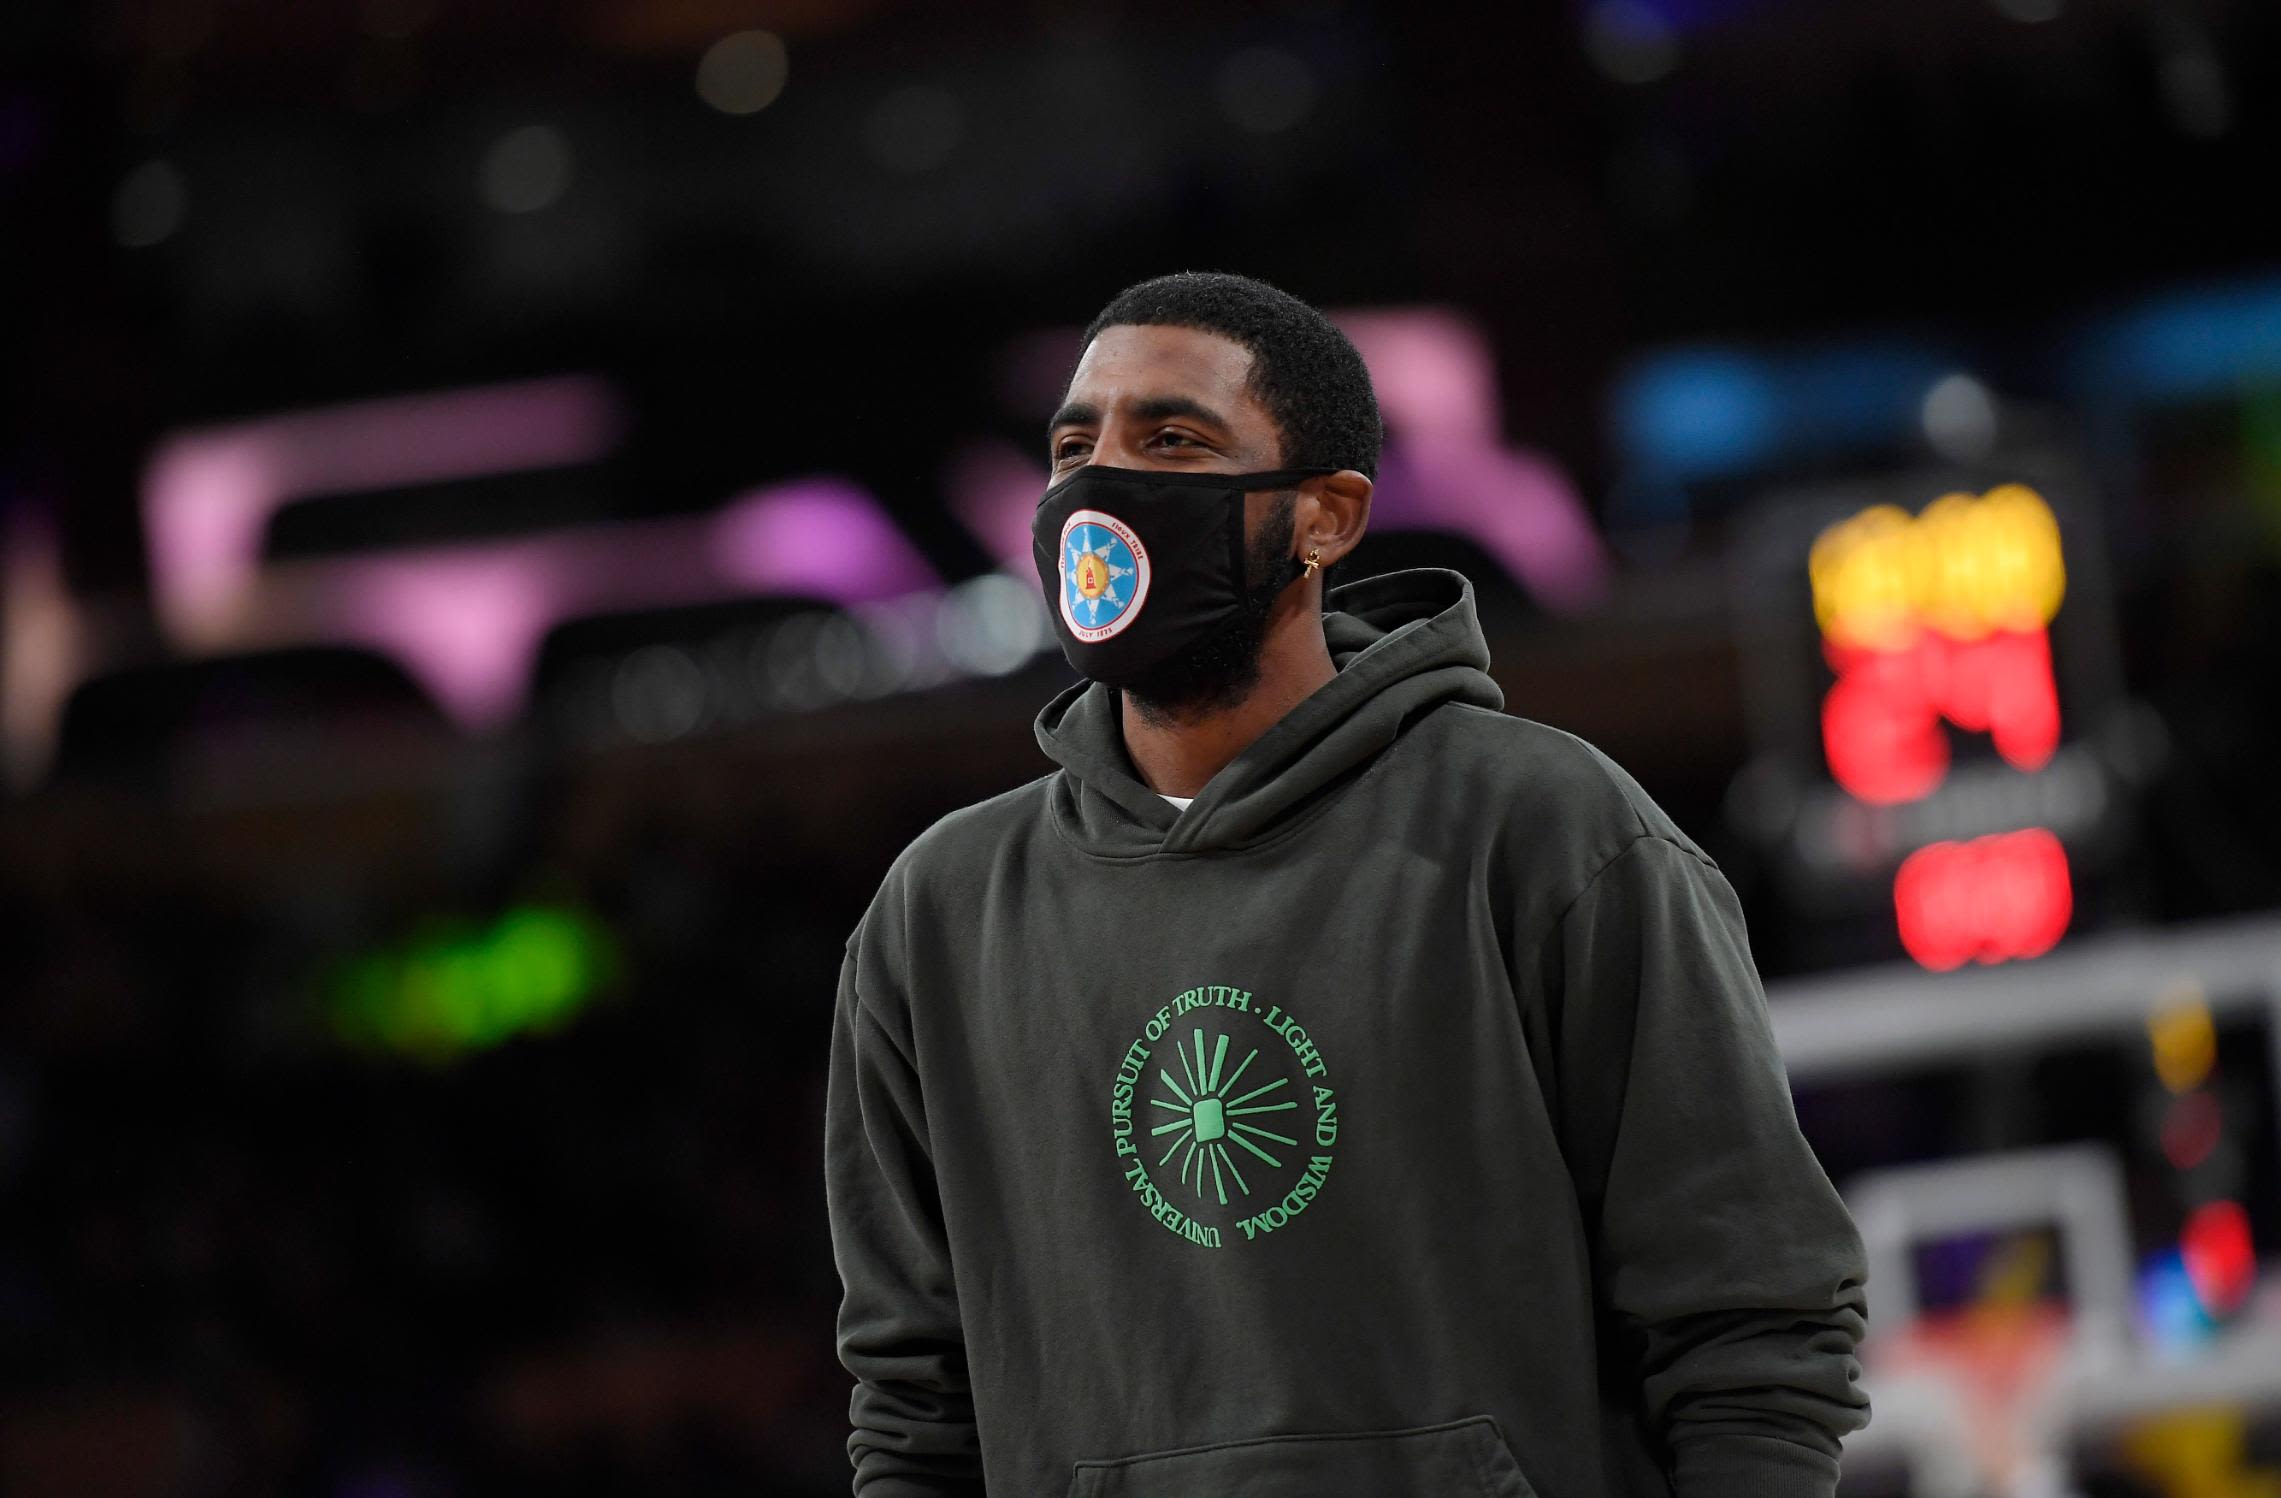 Nets' Star Kyrie Irving Could Lose $380,000 Over Vaccine Status